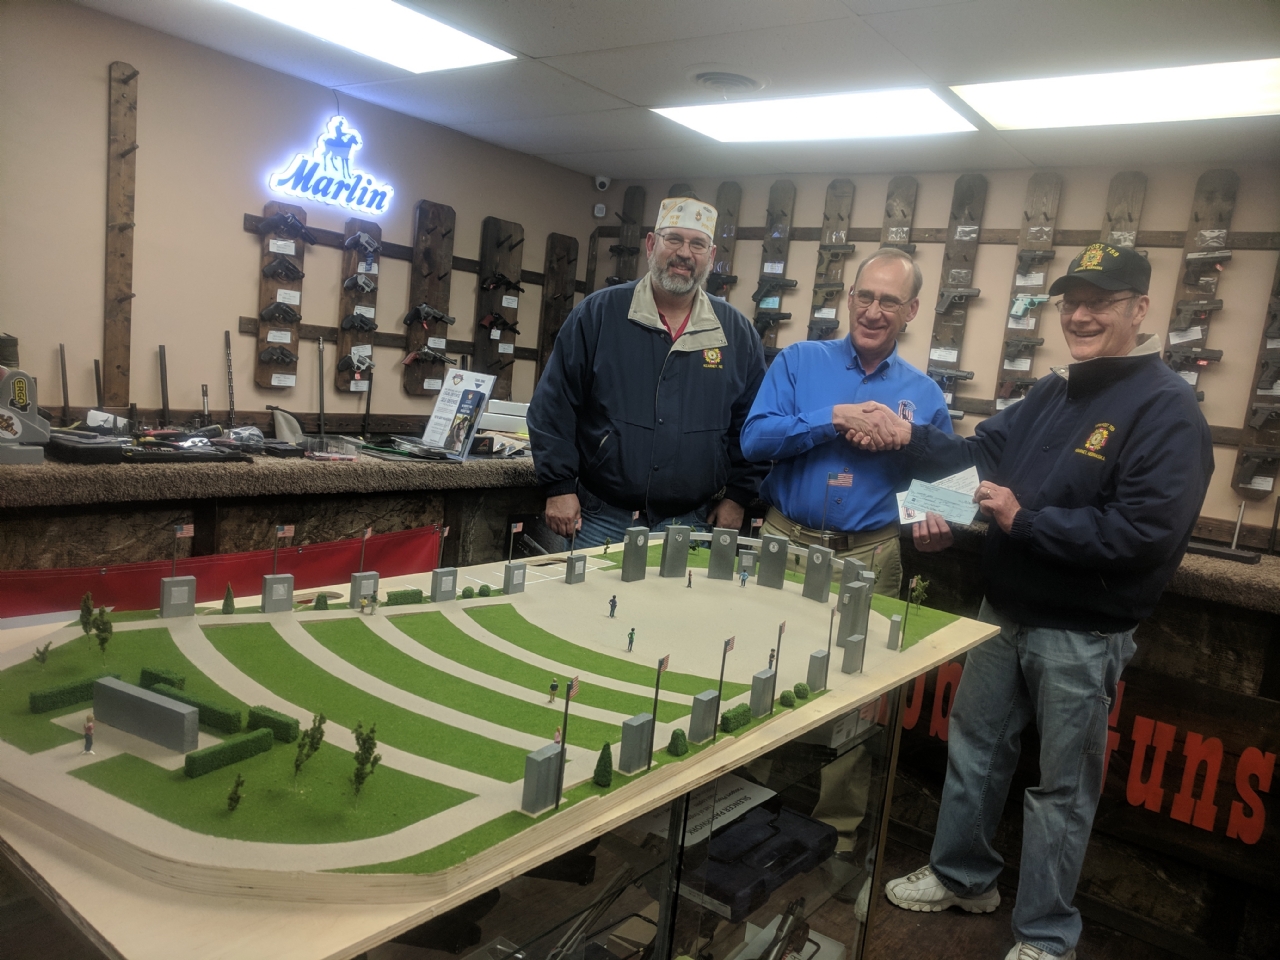 Post Commander John Kruse, with Quartermaster Jim Lutz, presets a check to Bob Harpst, Chairman of the Central Nebraska Veterans Memorial, with a check for $2,000 and a pledge to donate and additional $3,000.